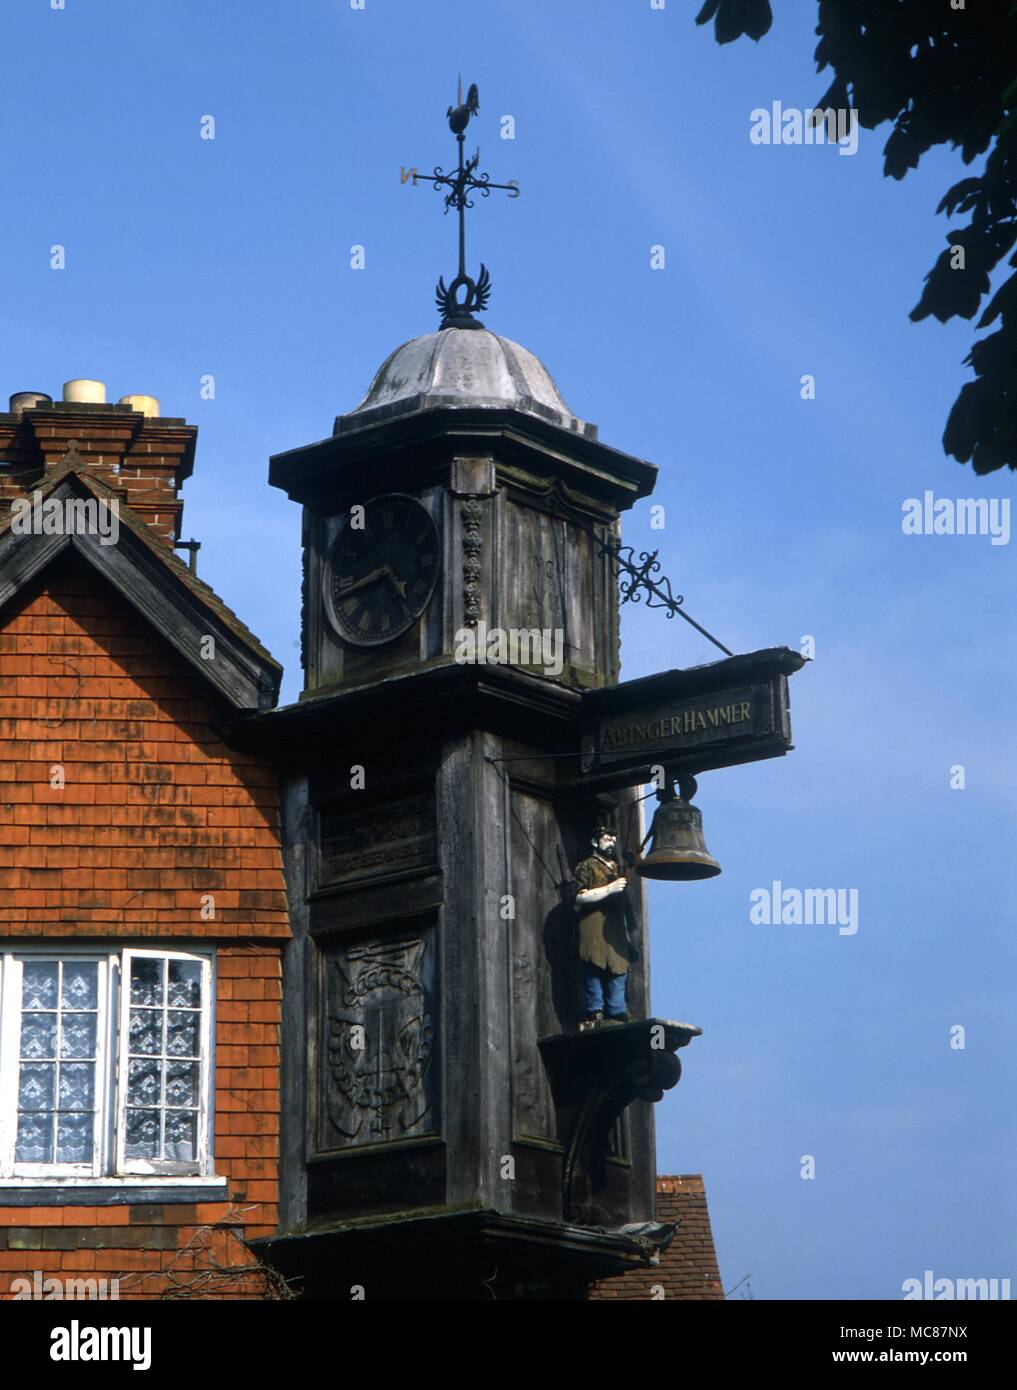 Horlogia and Clocks The Abinger Hammer clock sports a blacksmith who strikes the hours of a bell. The insciption reads By me you know how fast I go the hammer points to the fact that the village was an important forging district Stock Photo